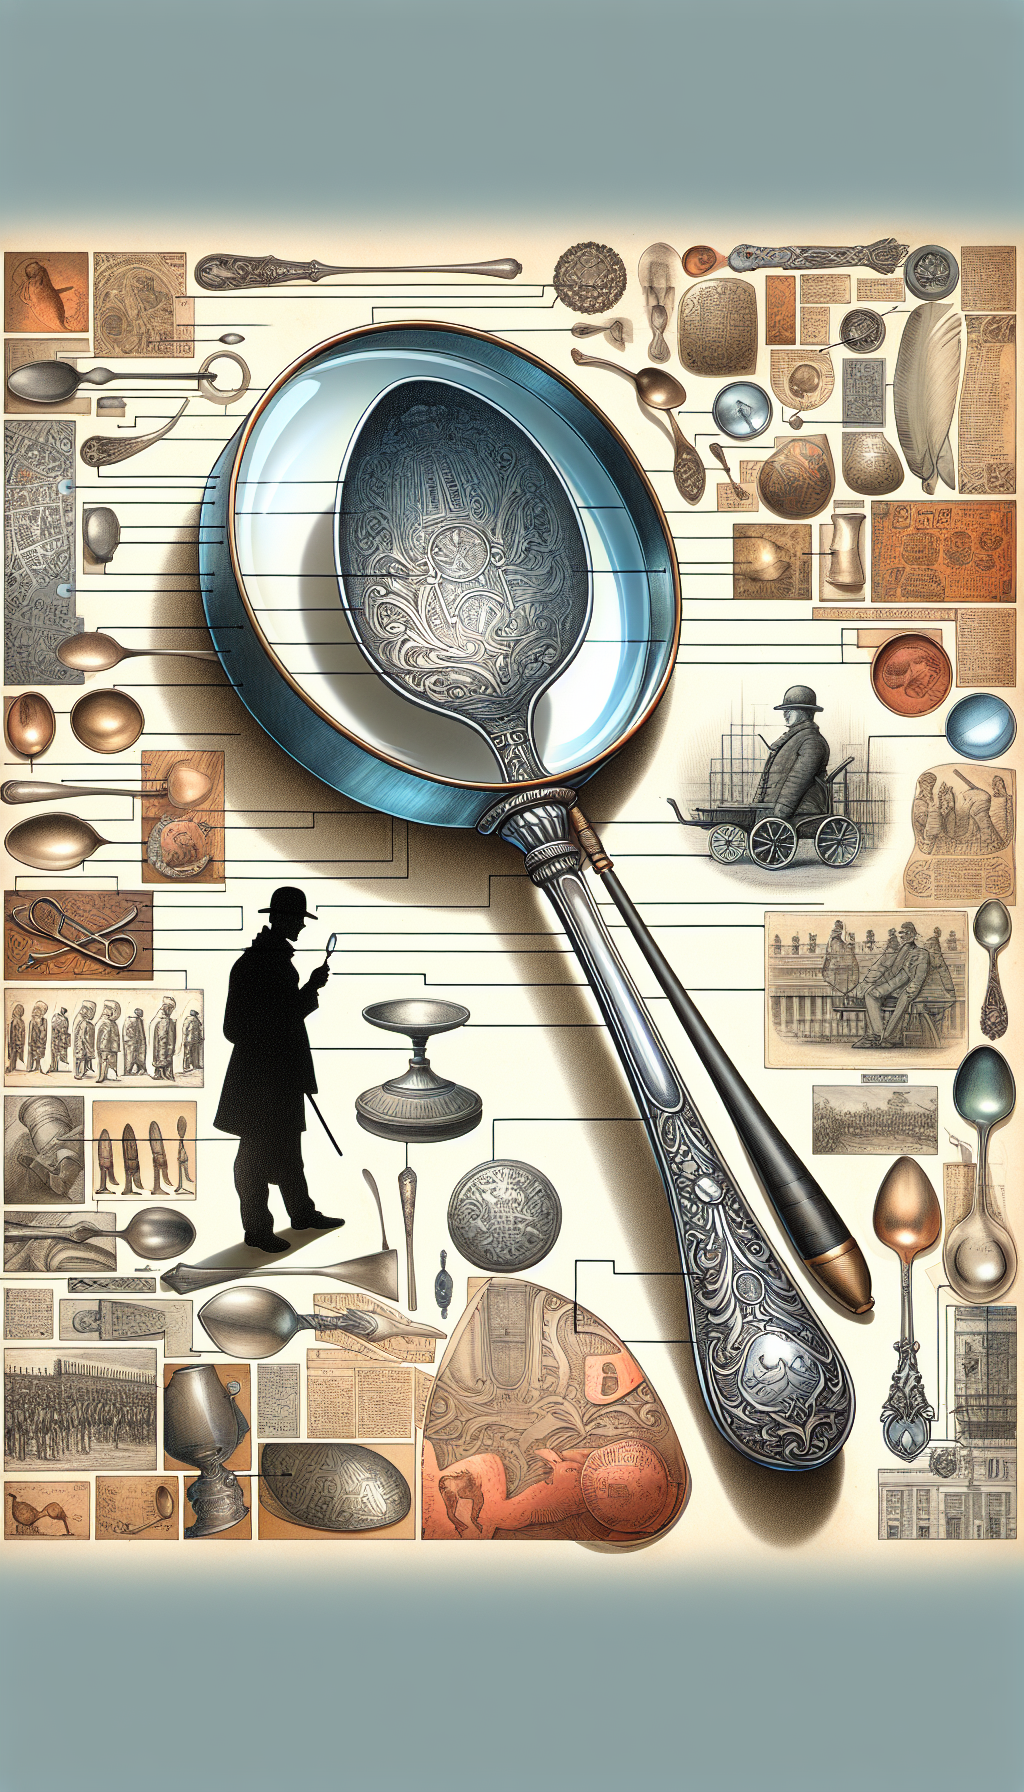 An intricate tableau portrays a magnifying glass hovering over an ornate, ancient spoon, revealing stamped hallmarks along its stem. Shadowy figures resembling renowned silversmiths are etched within the marks, while a timeline unfurls in the background, stitching dates and places into a tapestry of history, blending styles of line art, photorealism, and watercolor washes to symbolize the detective work of antique spoon identification.